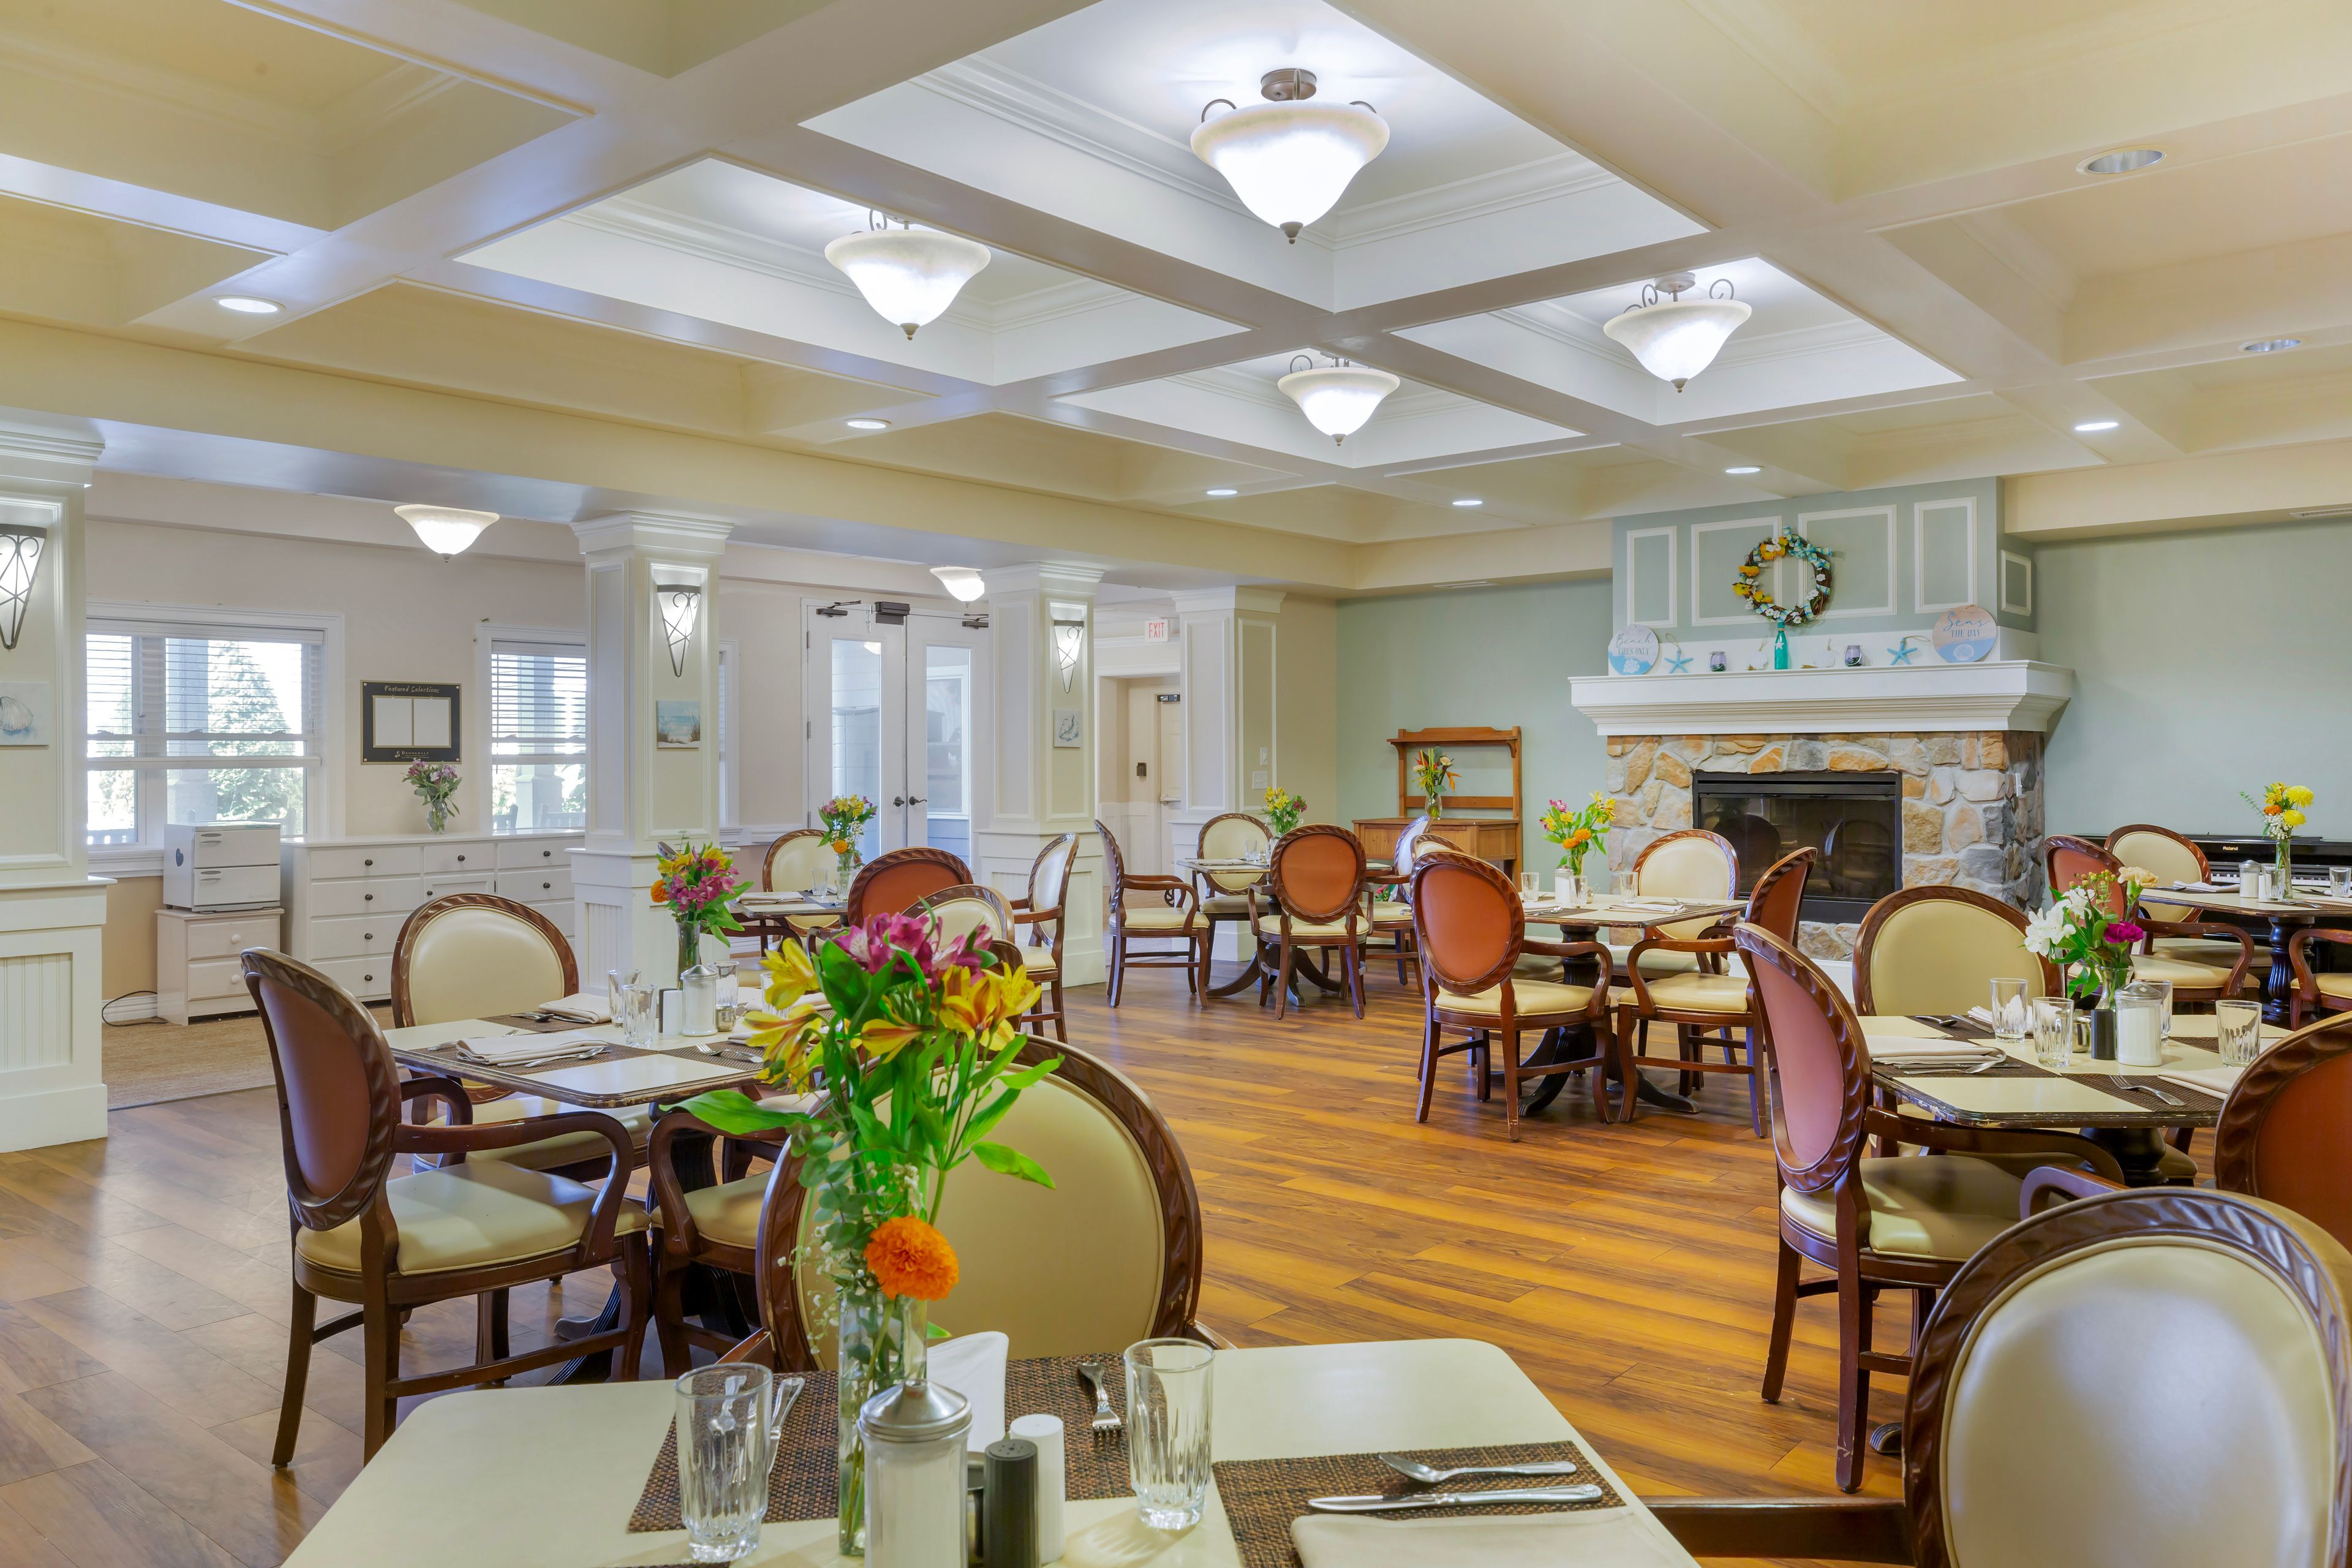 Interior view of Brookdale Centre of New England's dining area with wooden furniture and floral decor.